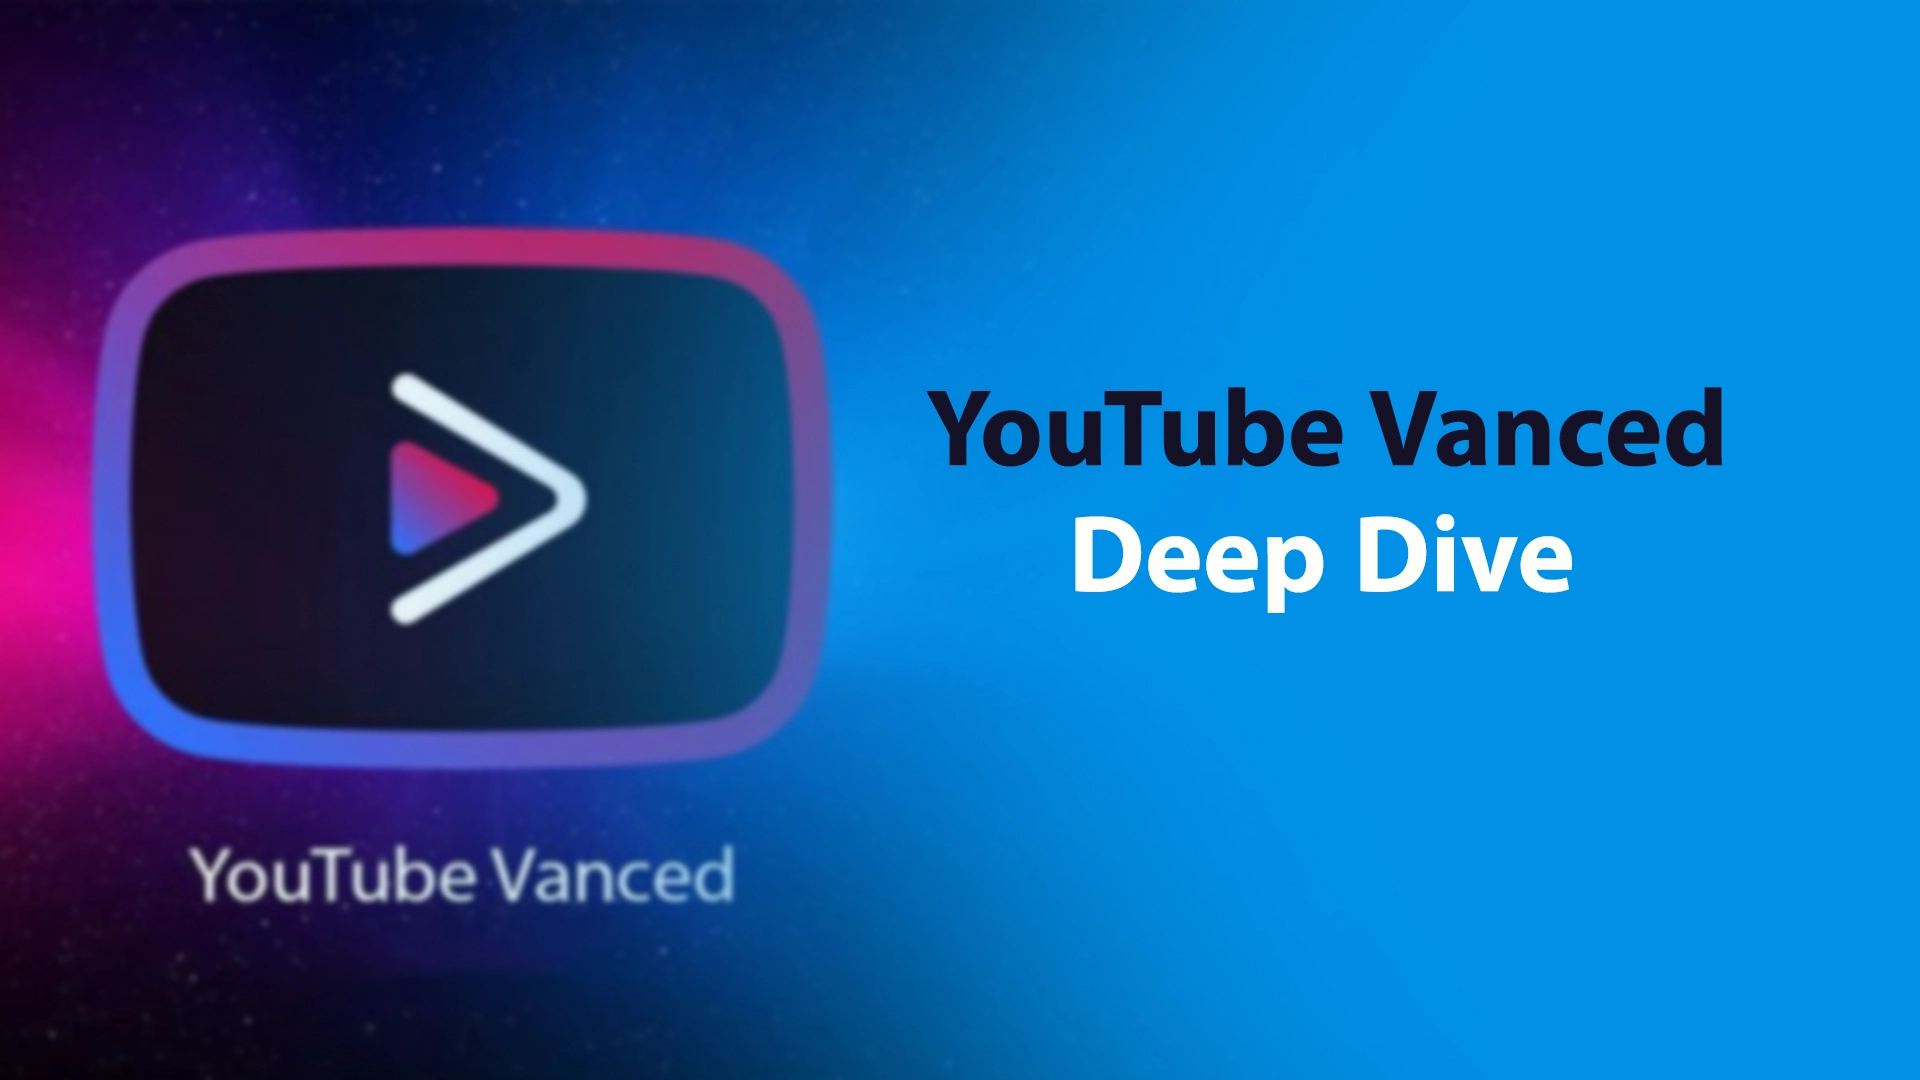 YouTube Vanced: The Allure and the Risk – A Comprehensive Deep Dive